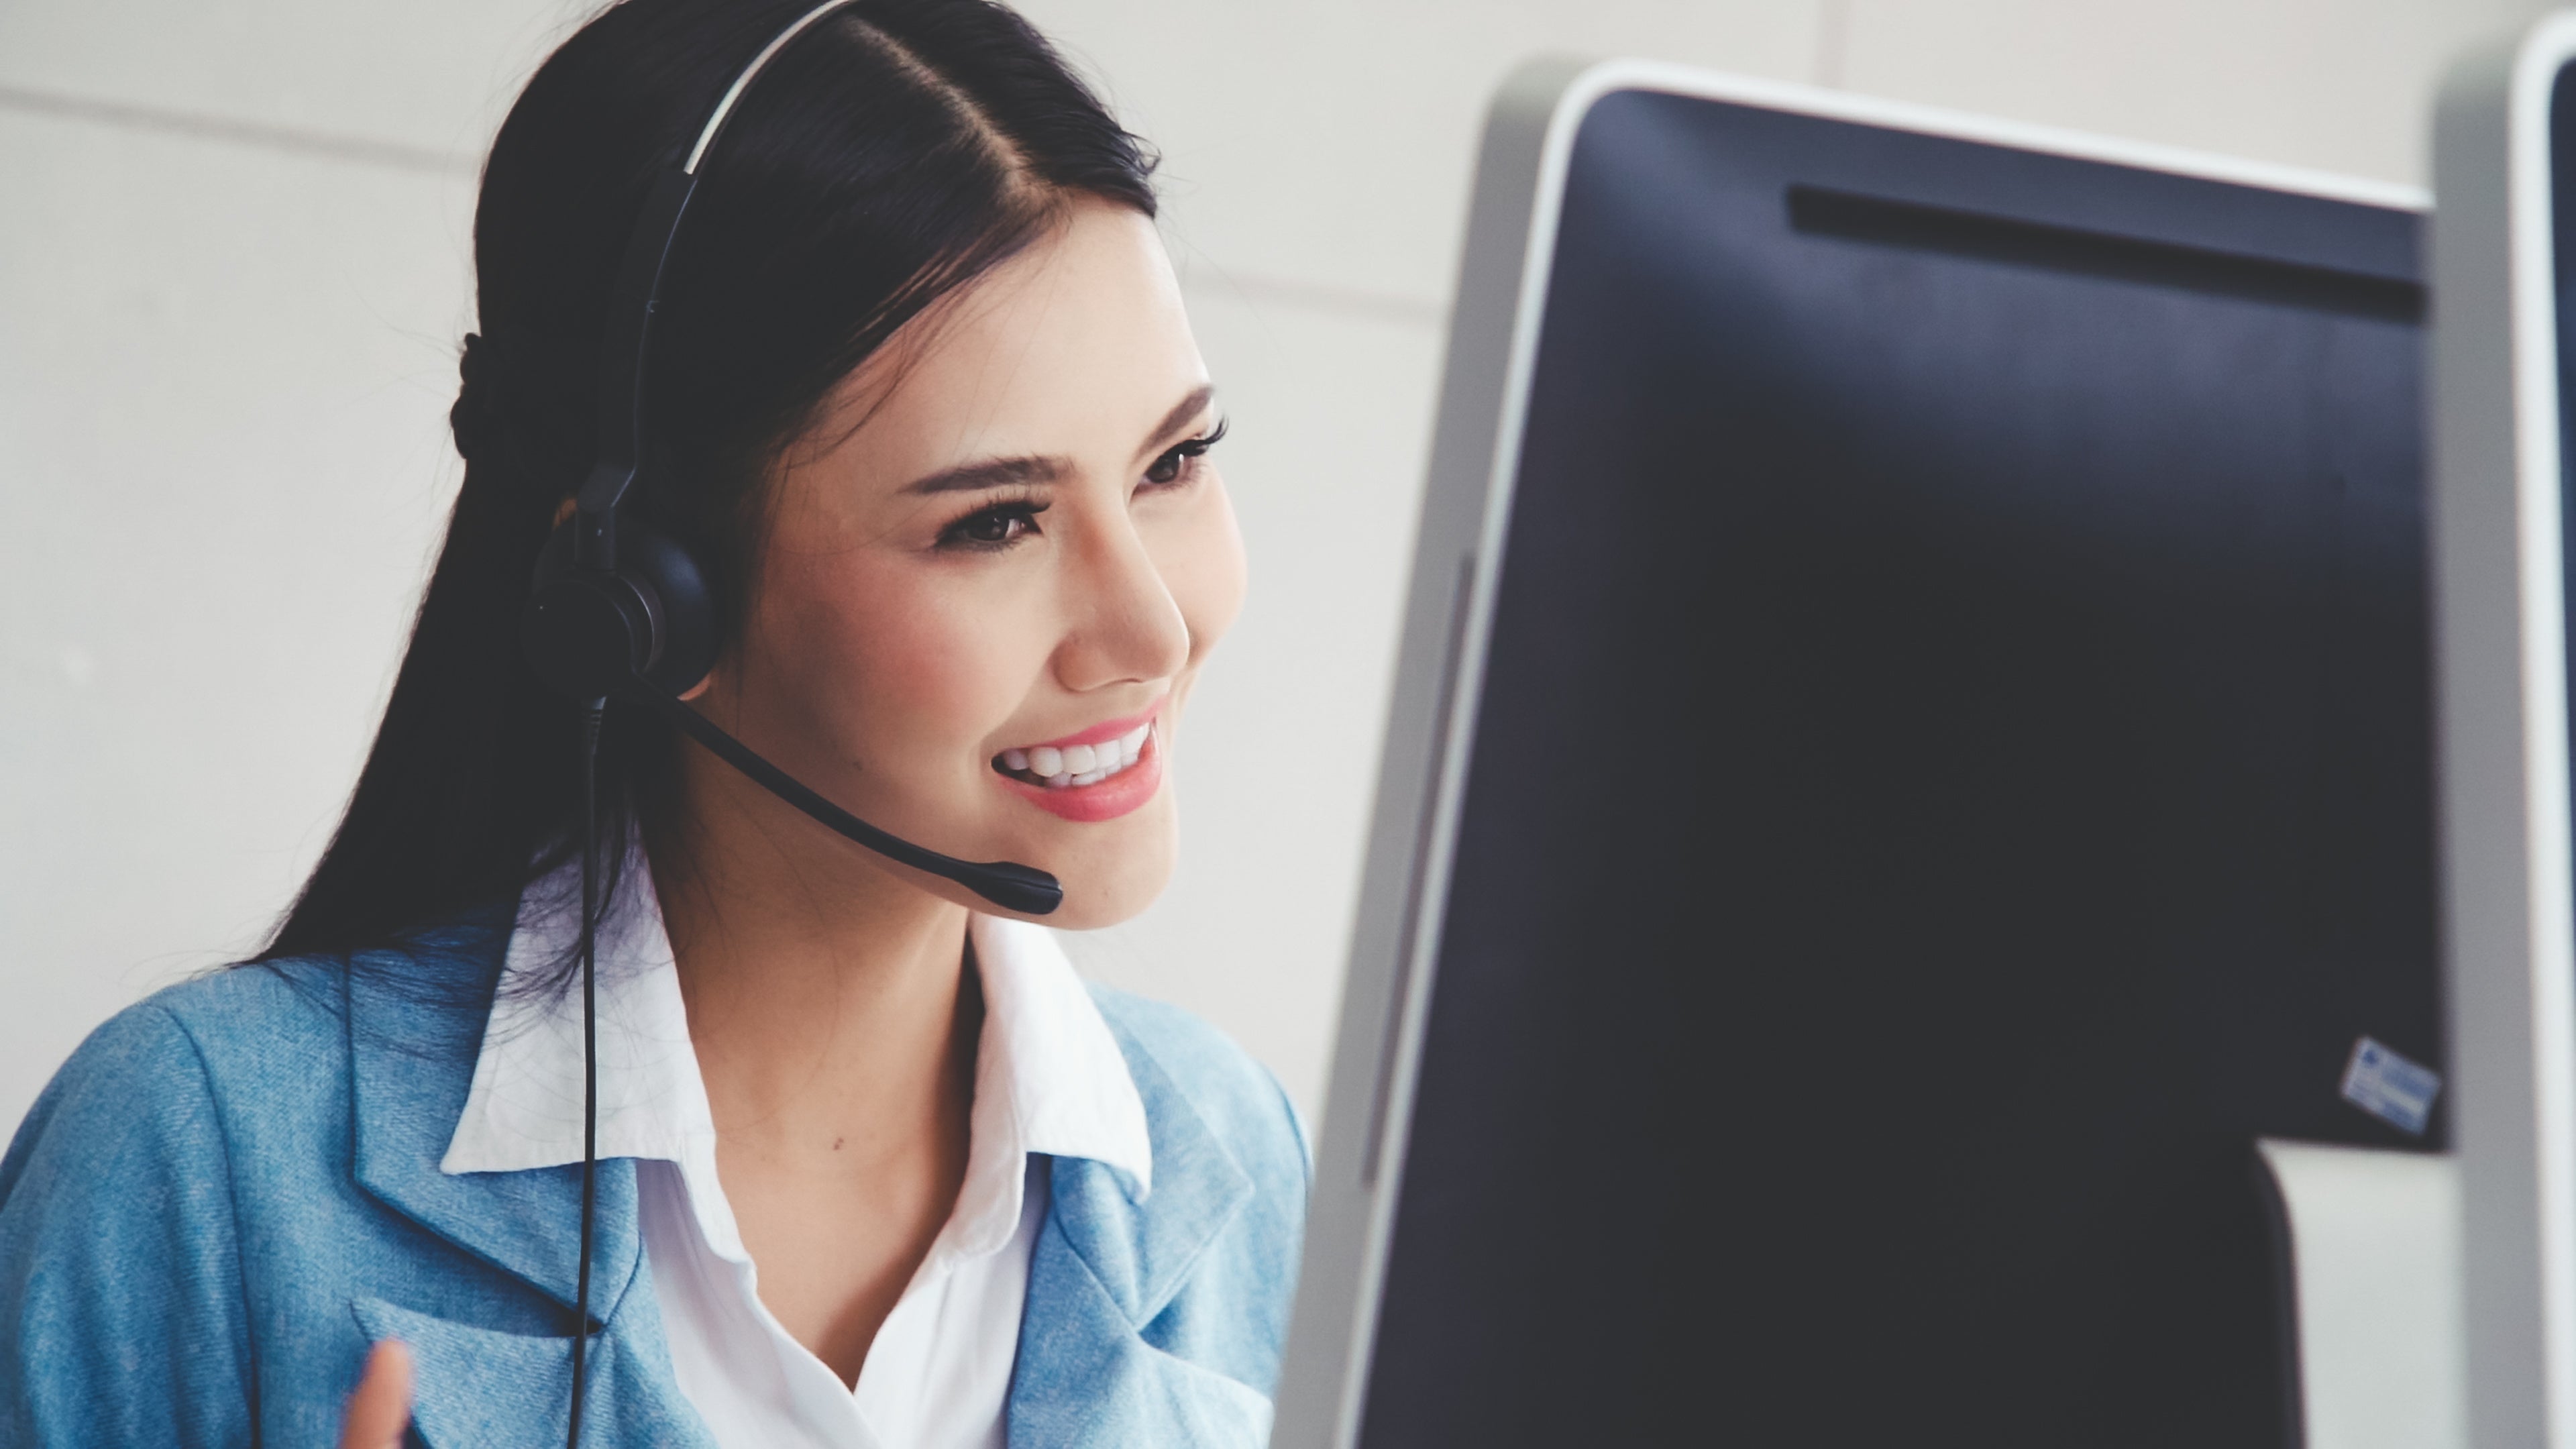 Call center woman smiling on phone